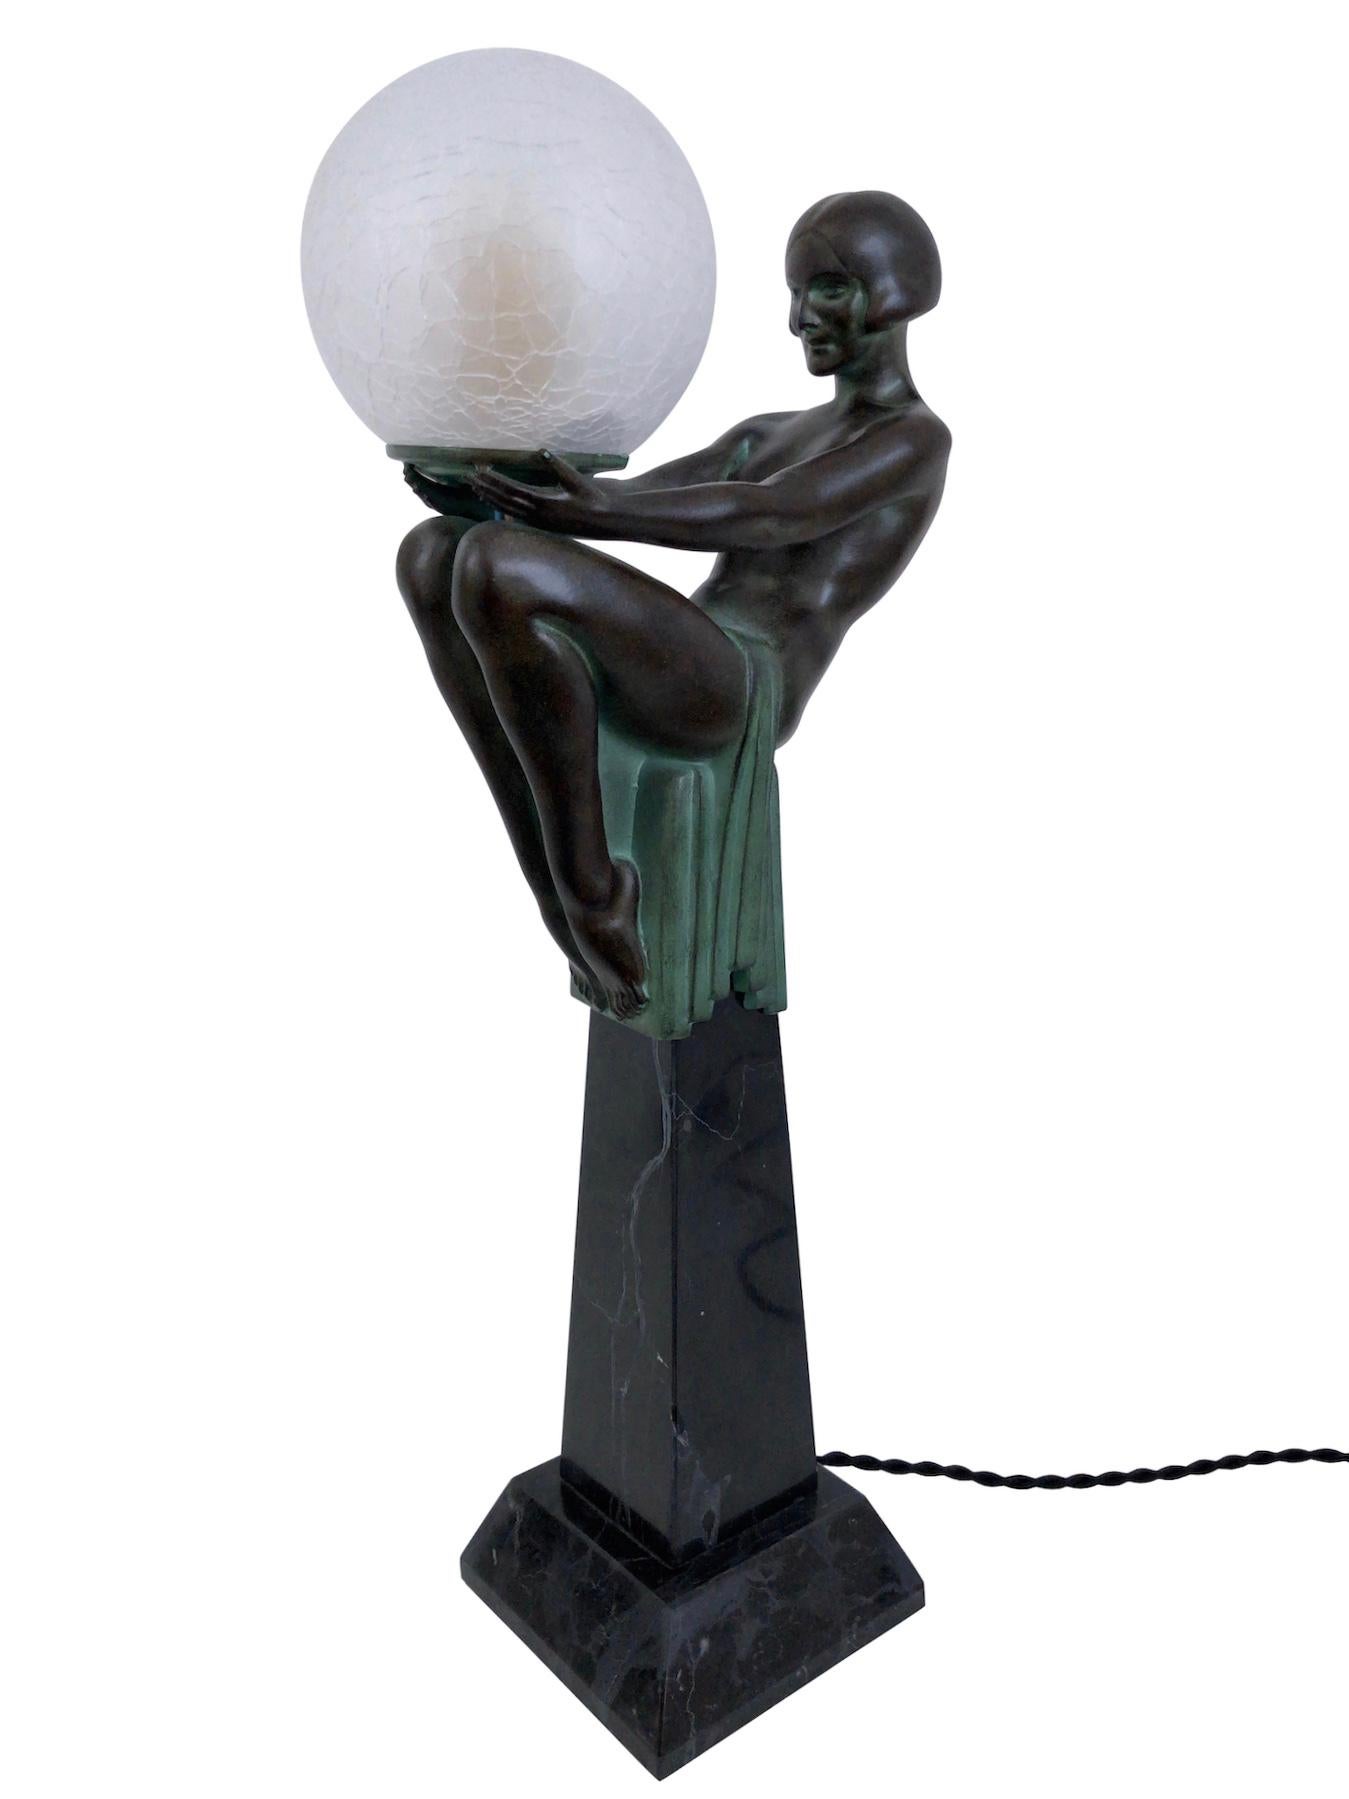 “Enigme” 
Original “Max Le Verrier”
Sculpture in Art Deco style, France 

Beautiful lady sitting on an Obelisk. 
She seems to be hypnotized and fascinated by the lighted Glass Ball. 
The lady wears a haircut typical for Art Deco: the bob. 
The